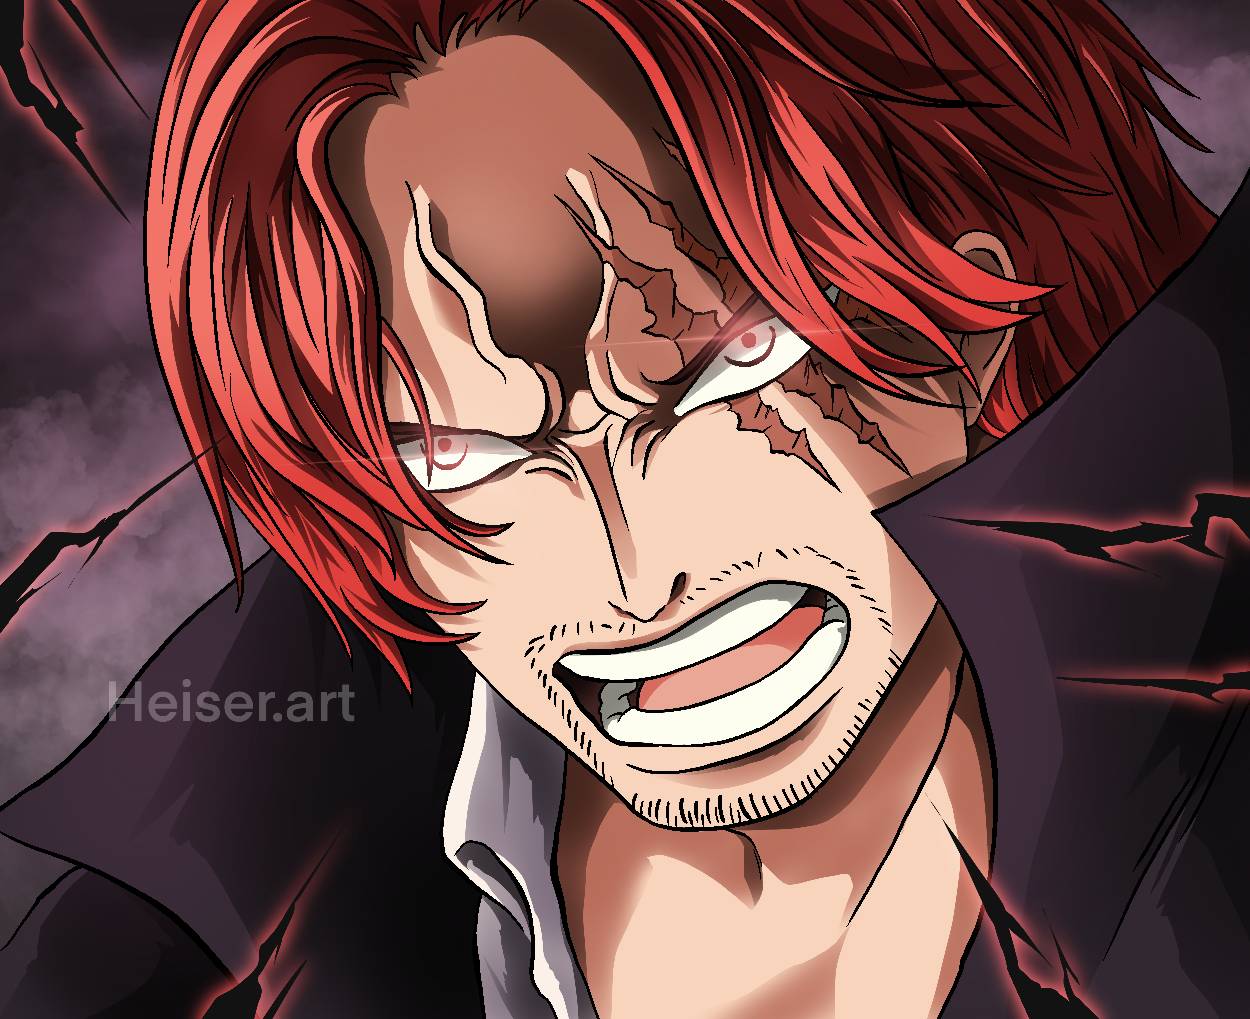 One Piece 1055 - Shanks by Melonciutus on DeviantArt